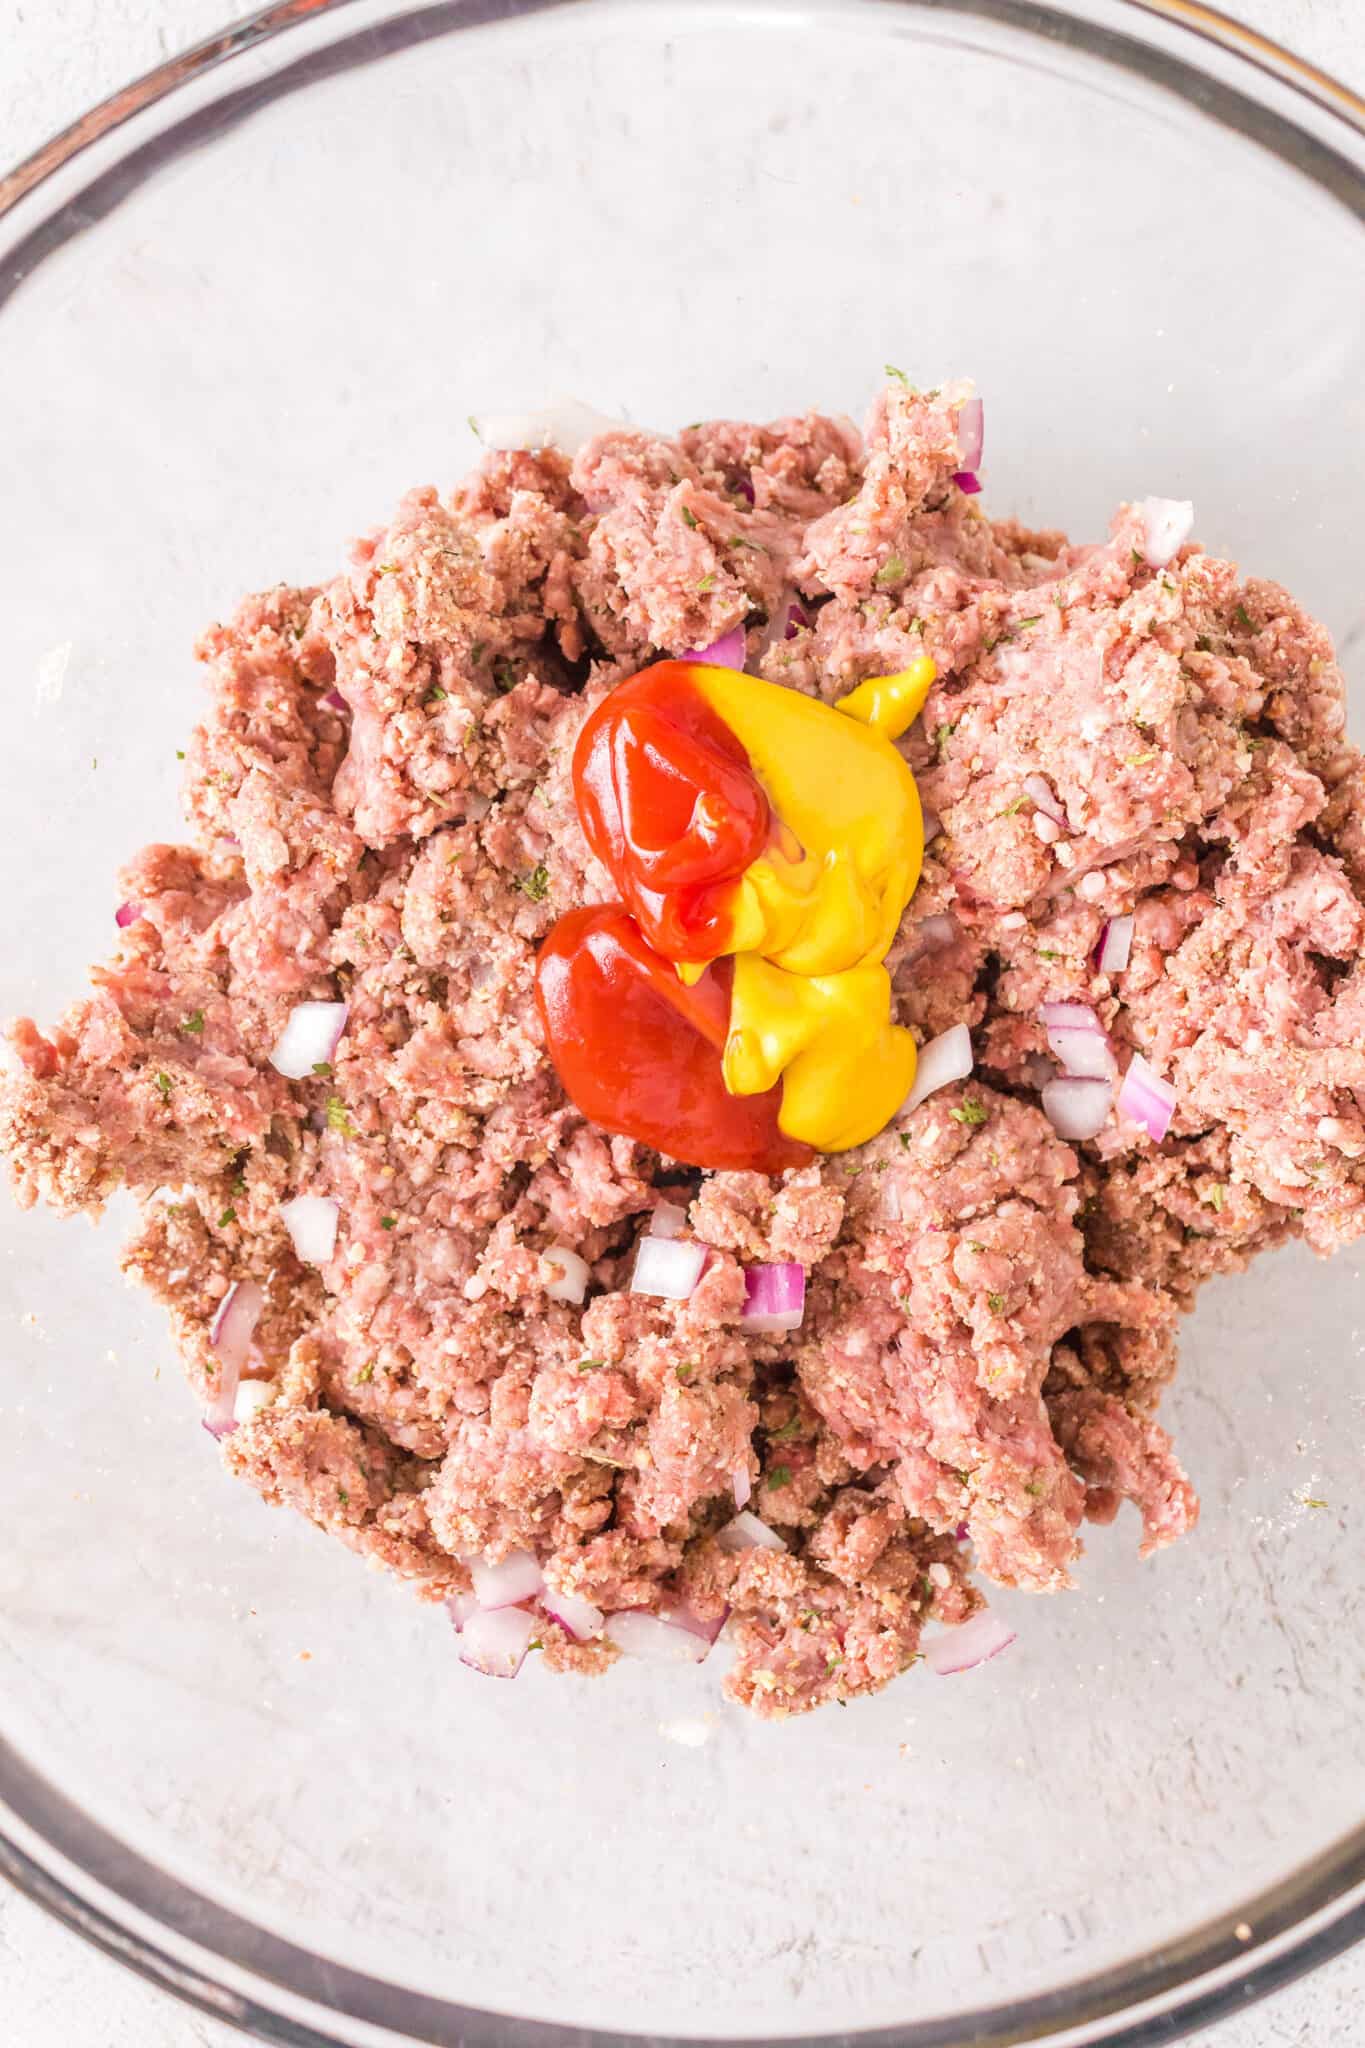 mustard and ketchup on top of ground beef mixture in a mixing bowl